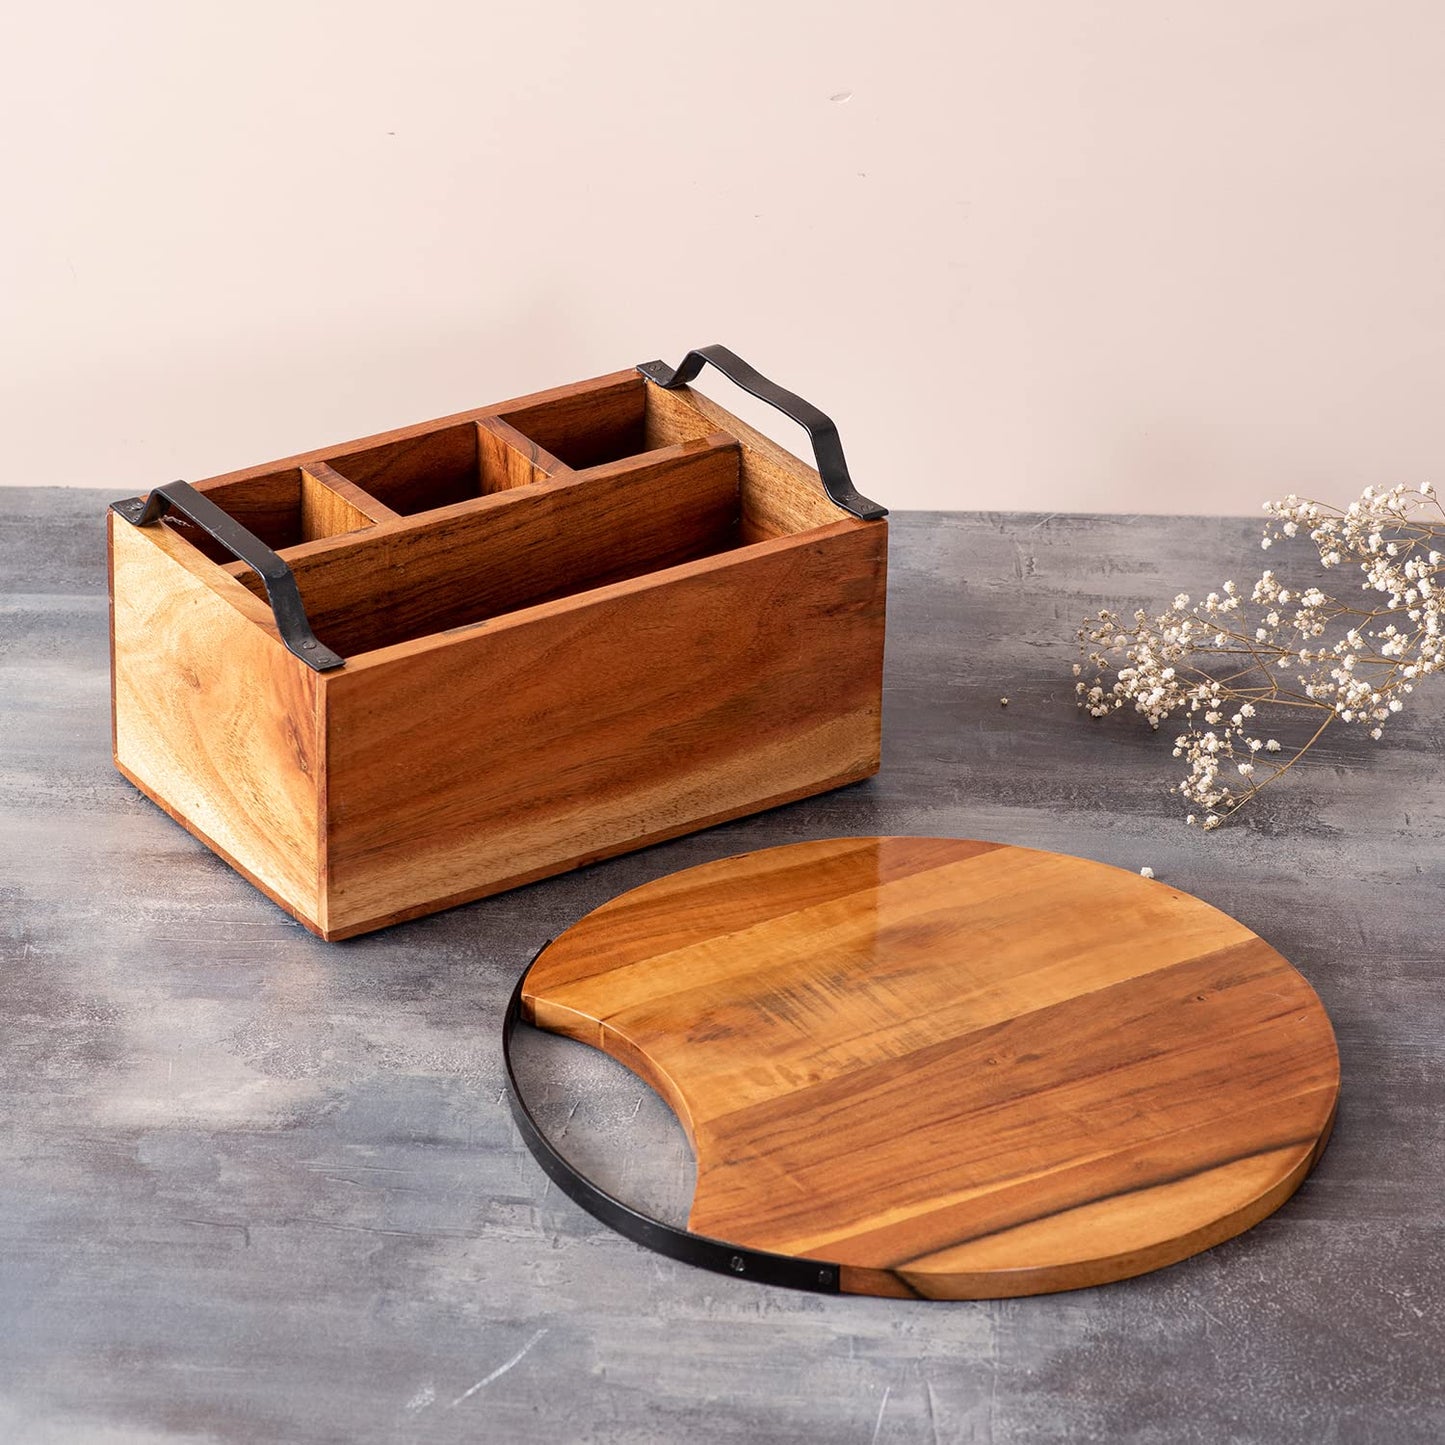 Buy Acacia Wood Spoon Stand with Serving Platter Online